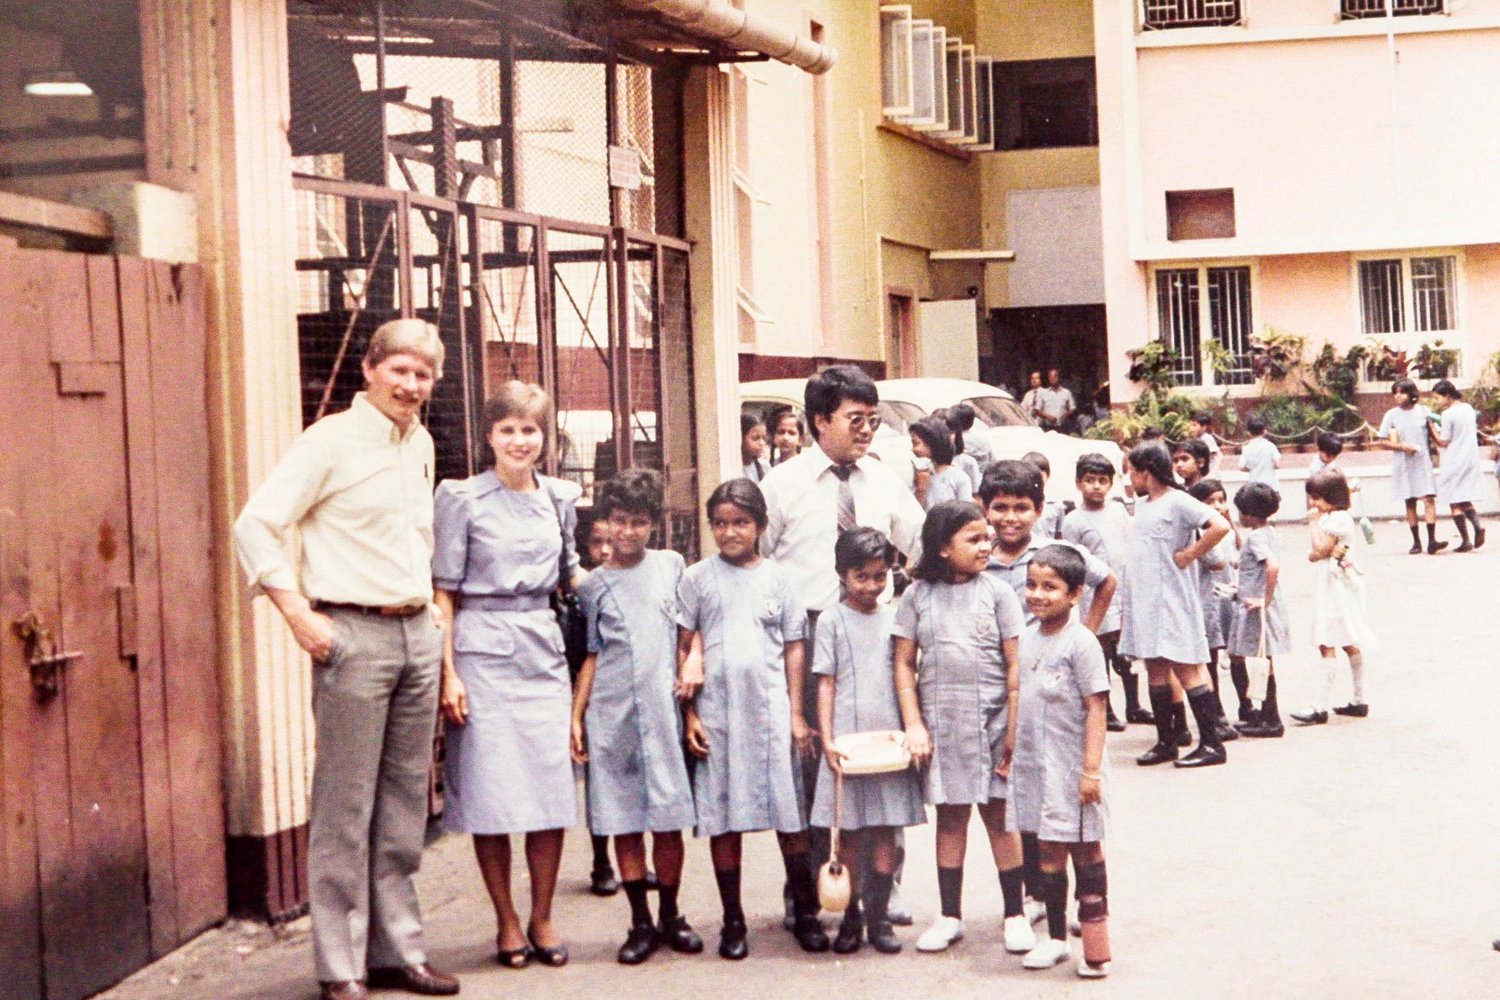 Hal and Doree Donaldson, left, with Convoy's Solomon Wang and children at an orphanage in India.